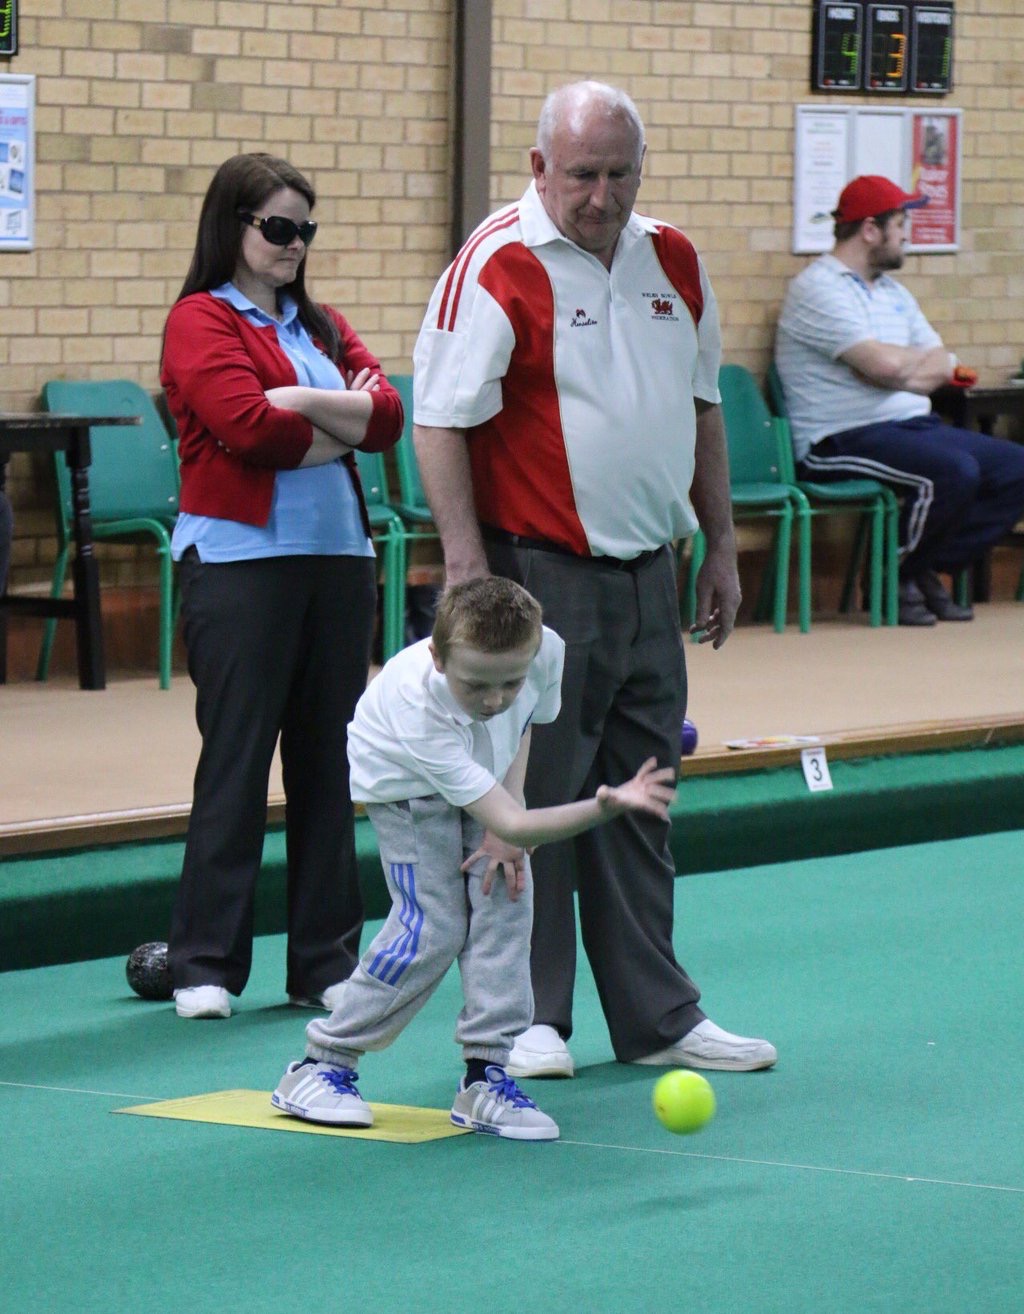 taking part in the bowls development day